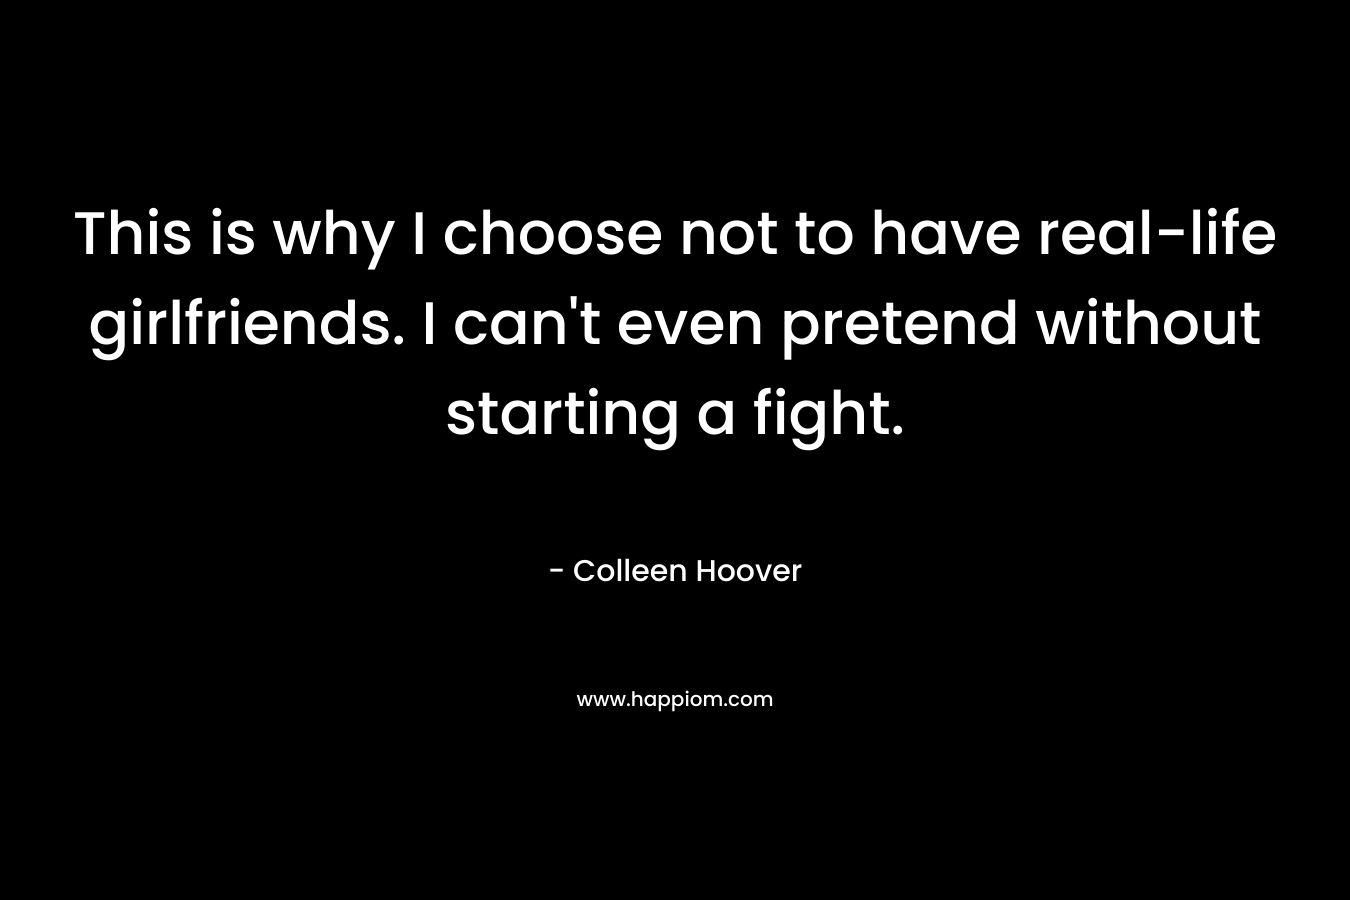 This is why I choose not to have real-life girlfriends. I can’t even pretend without starting a fight. – Colleen Hoover